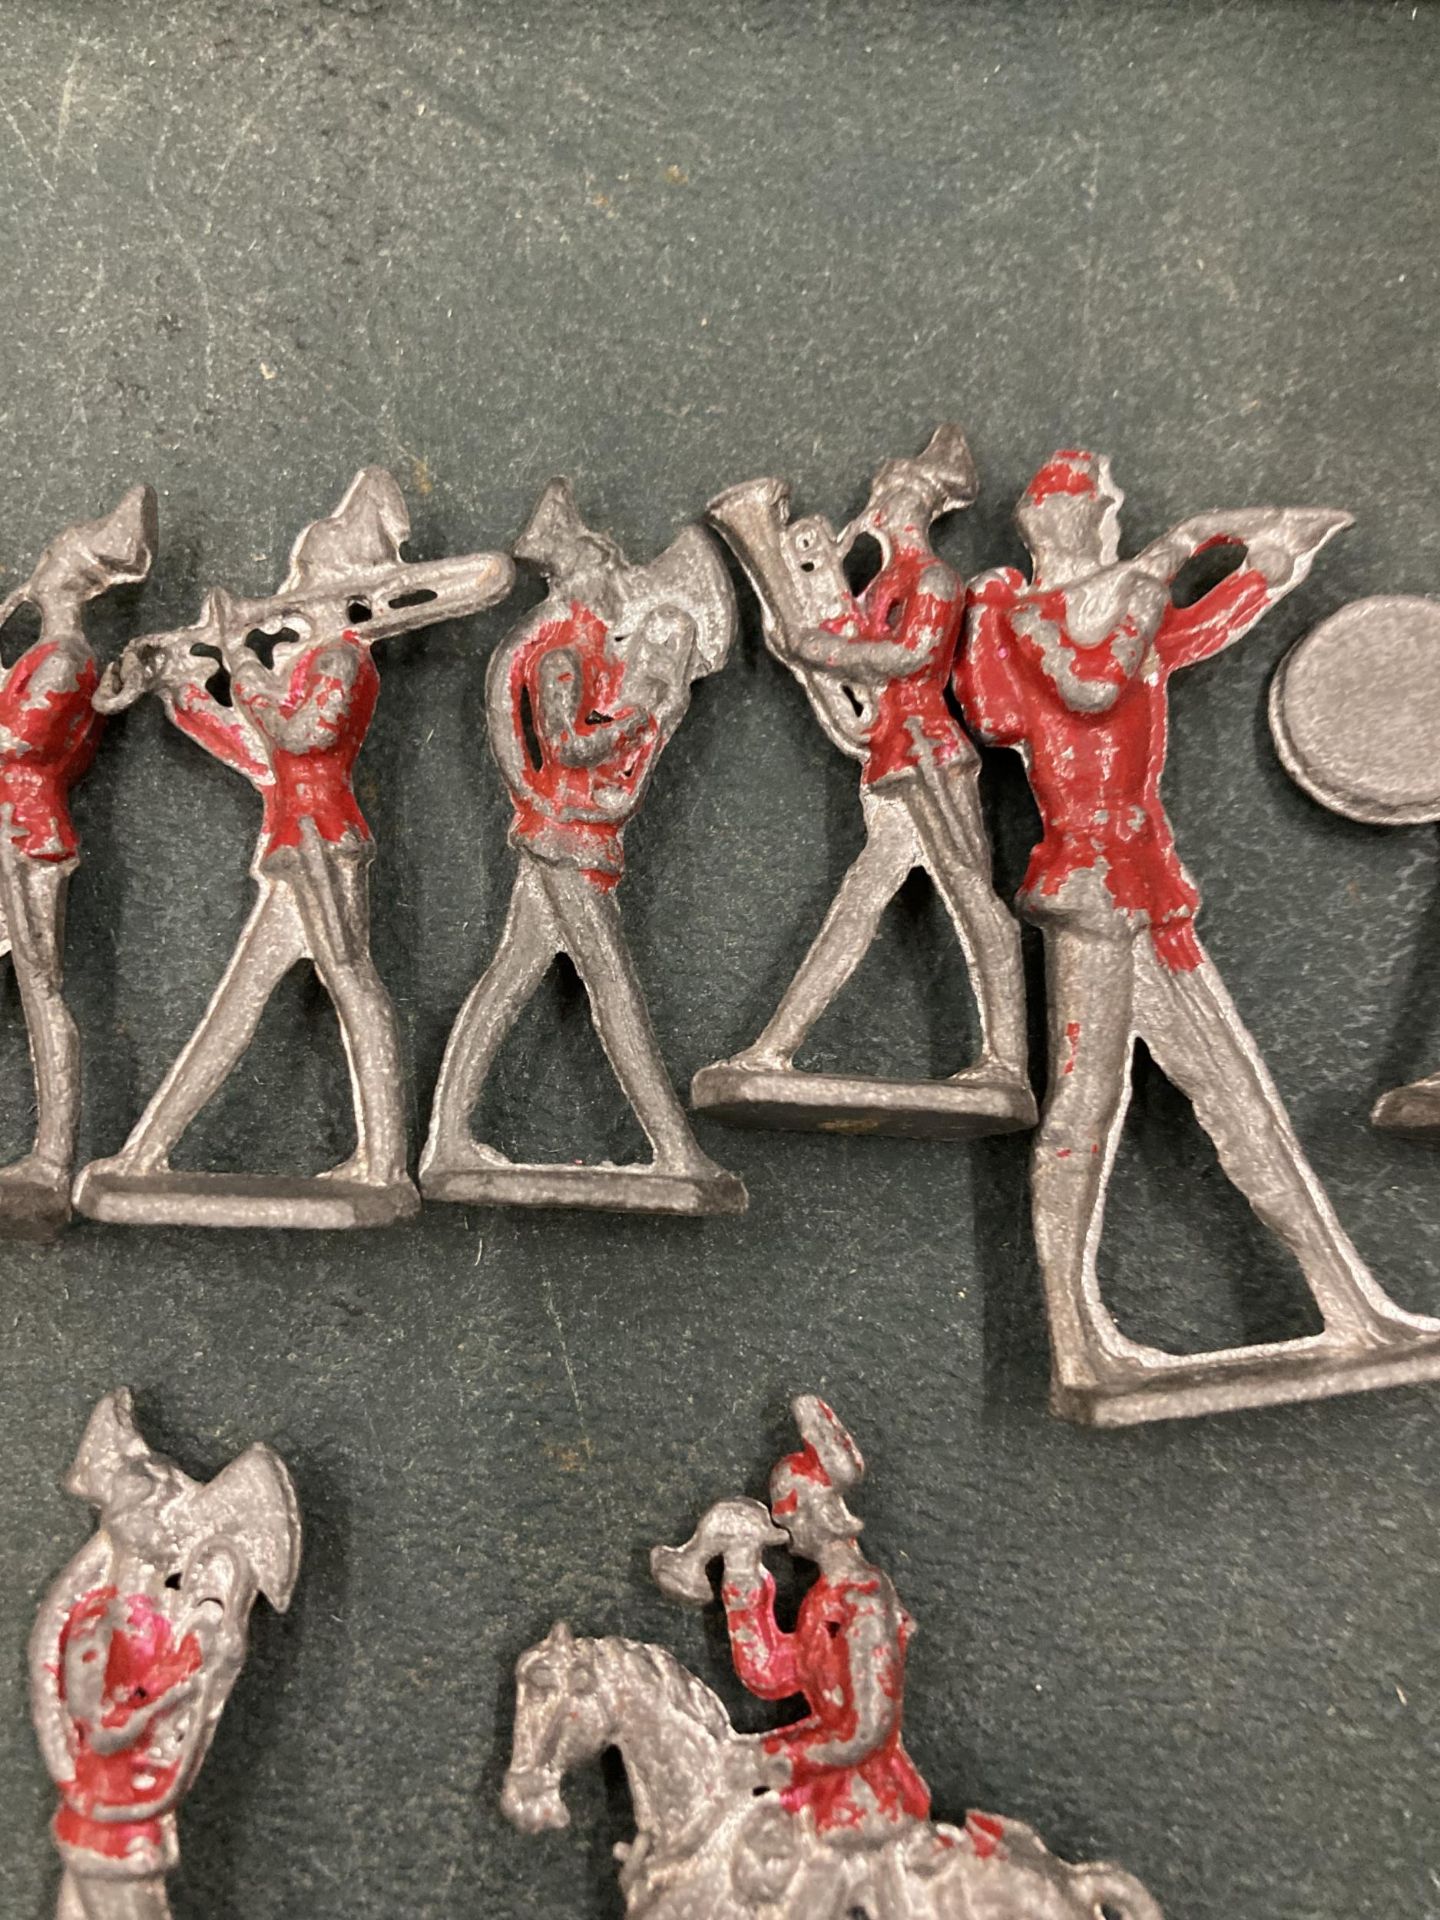 A VINTAGE 12 PIECE LEAD REDCOAT BRASS BAND - Image 3 of 5